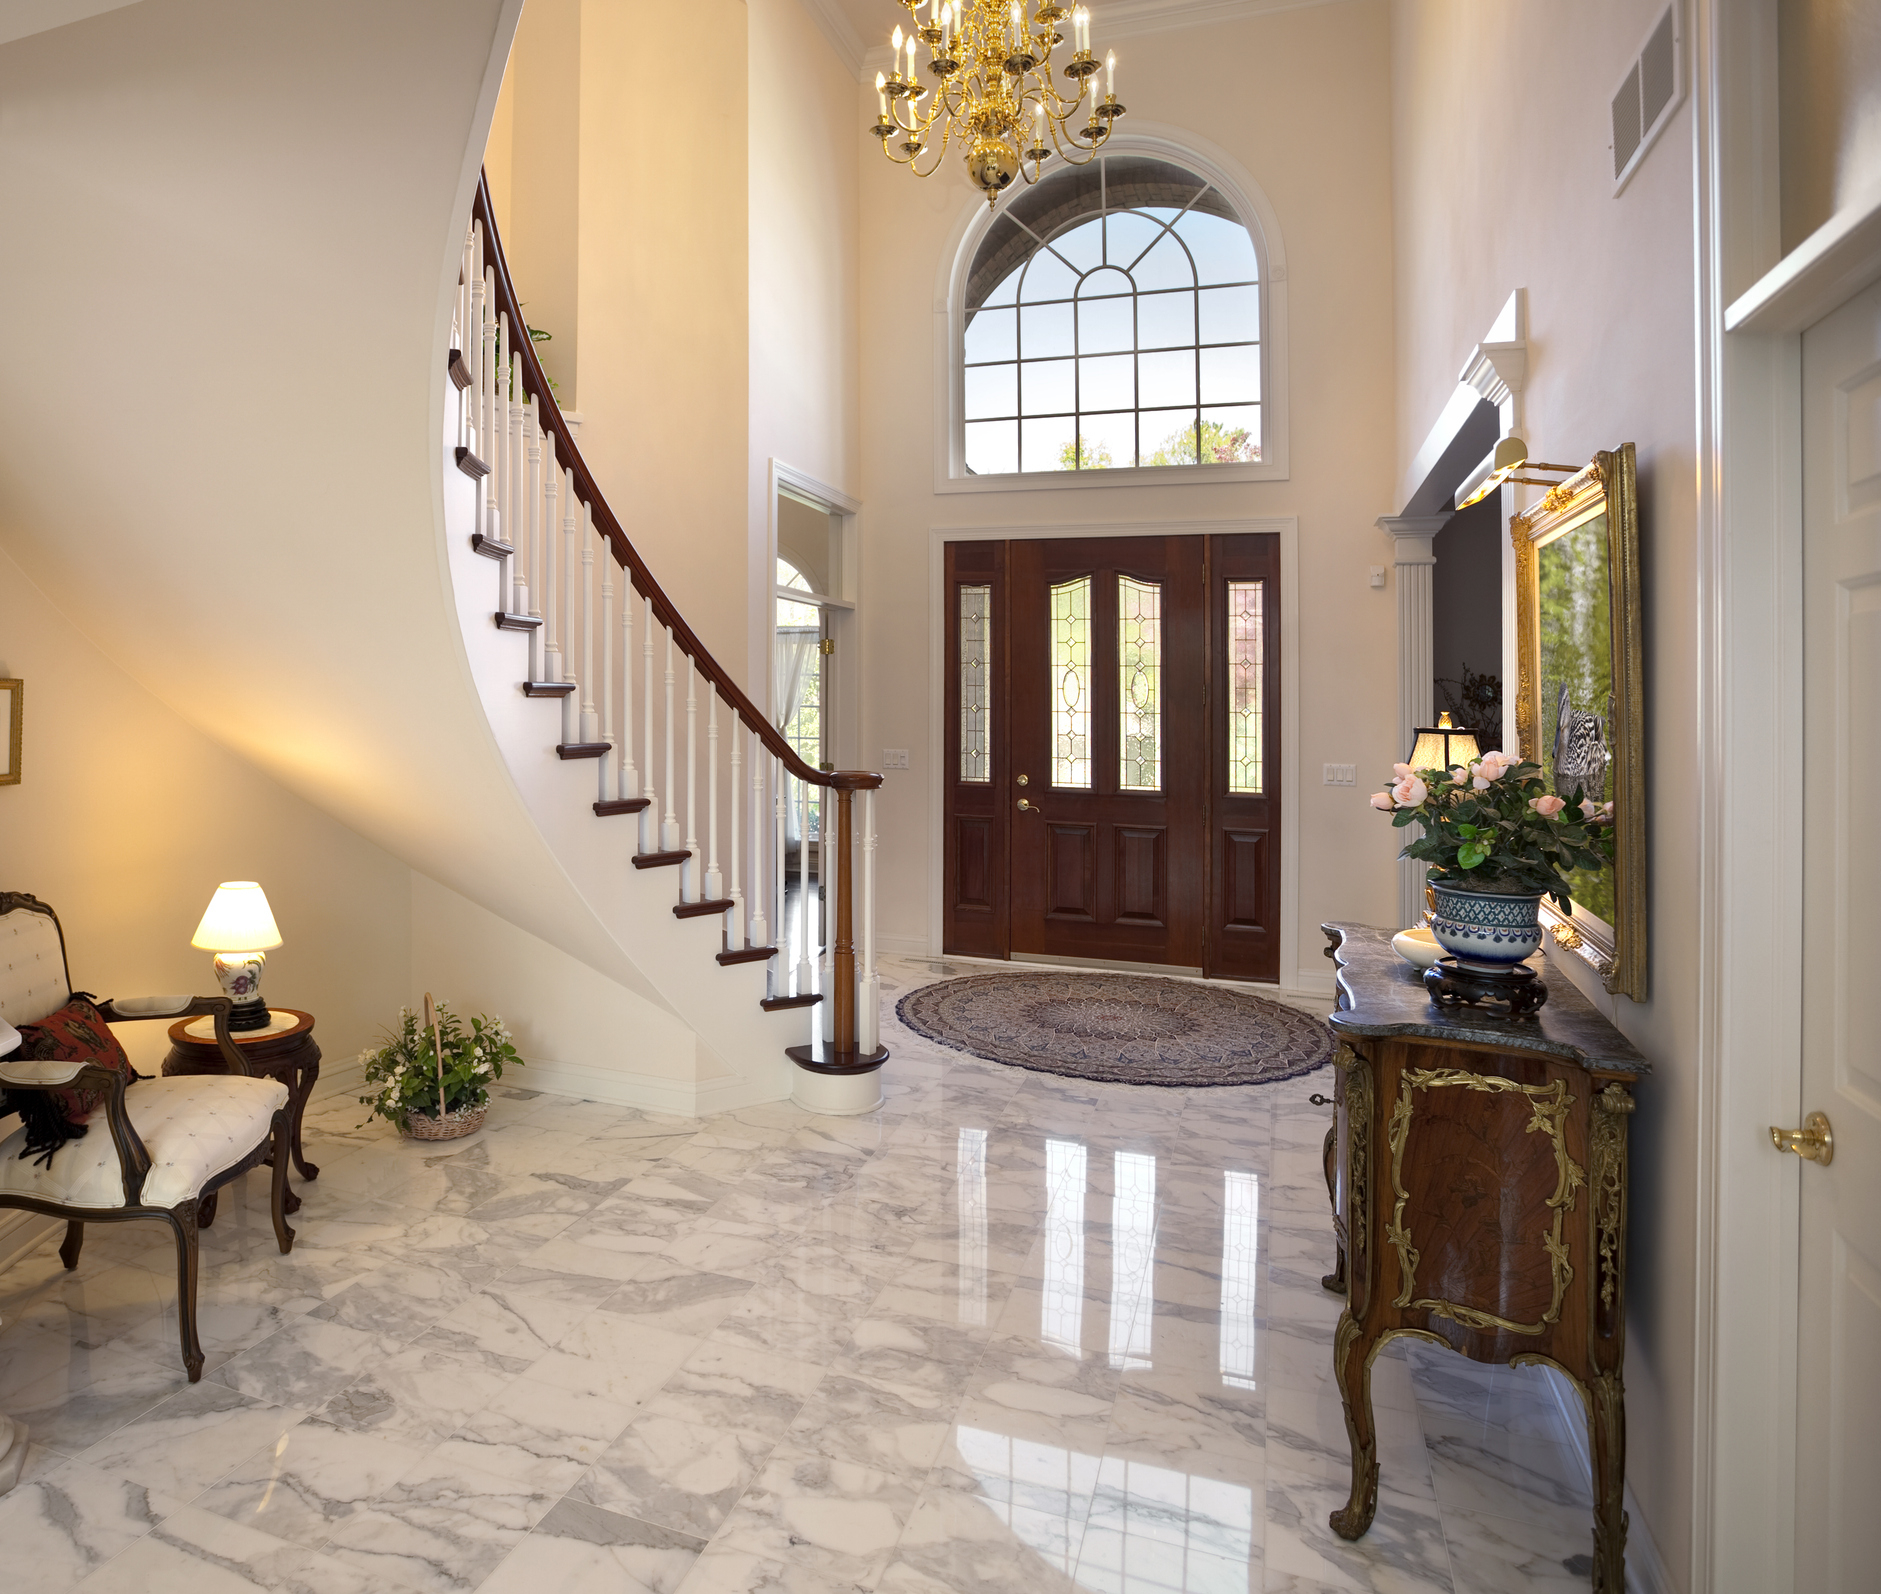 Elegant home entryway with staircase, chandelier, and double front doors